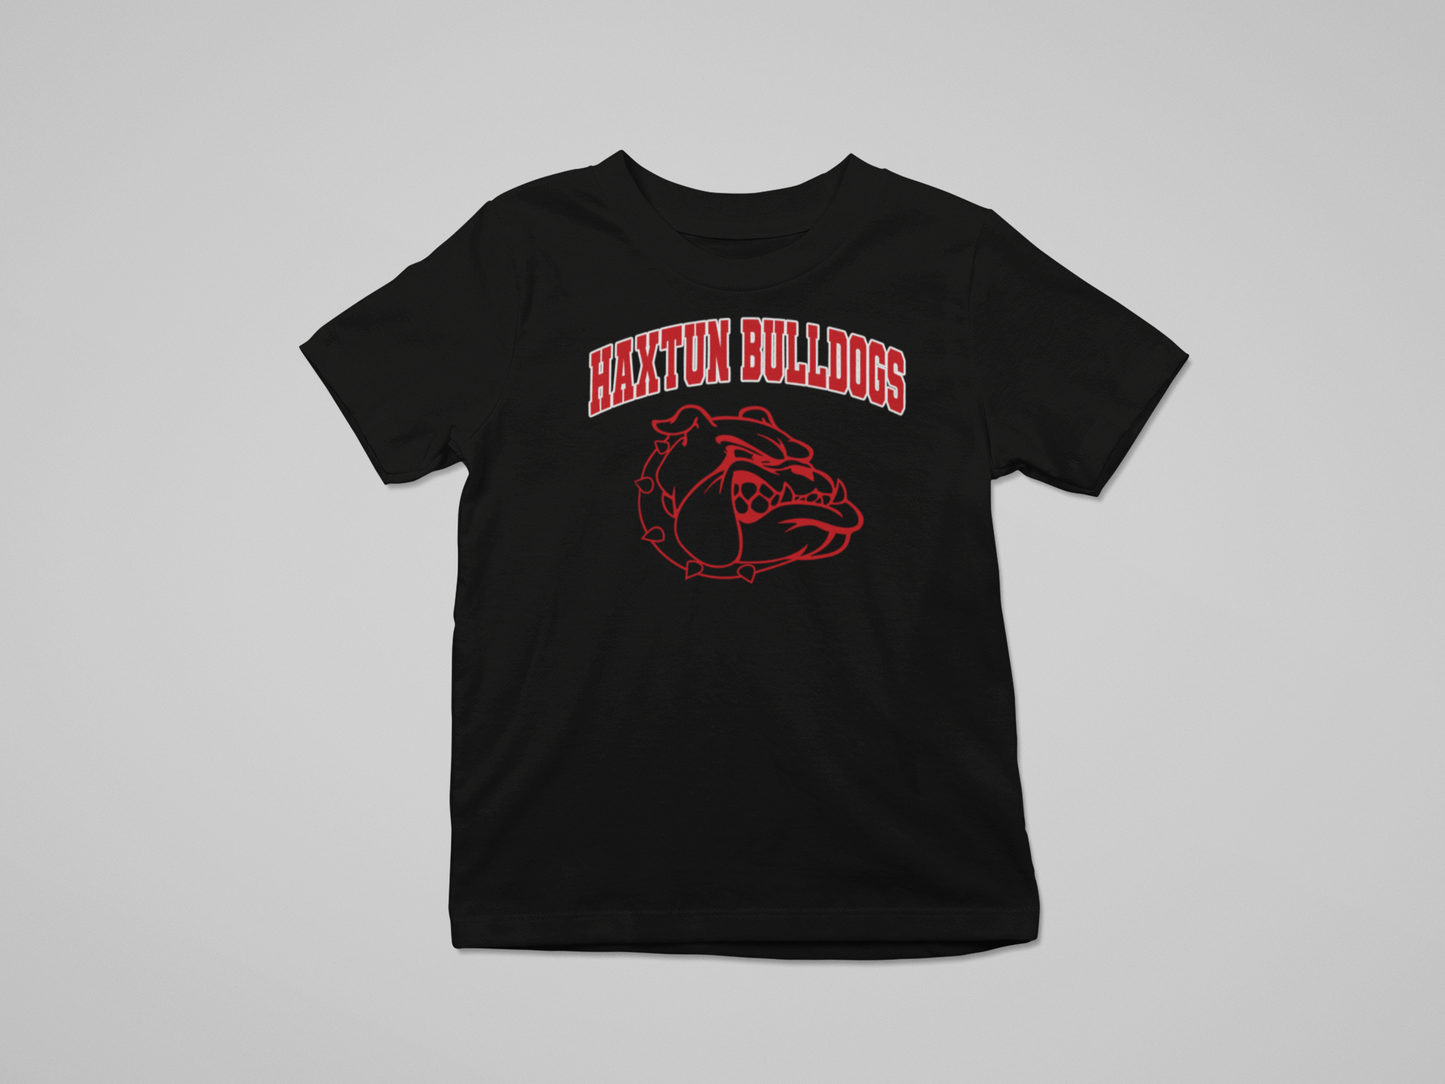 haxtun bulldogs infant t-shirt: for lil' bullpups only!